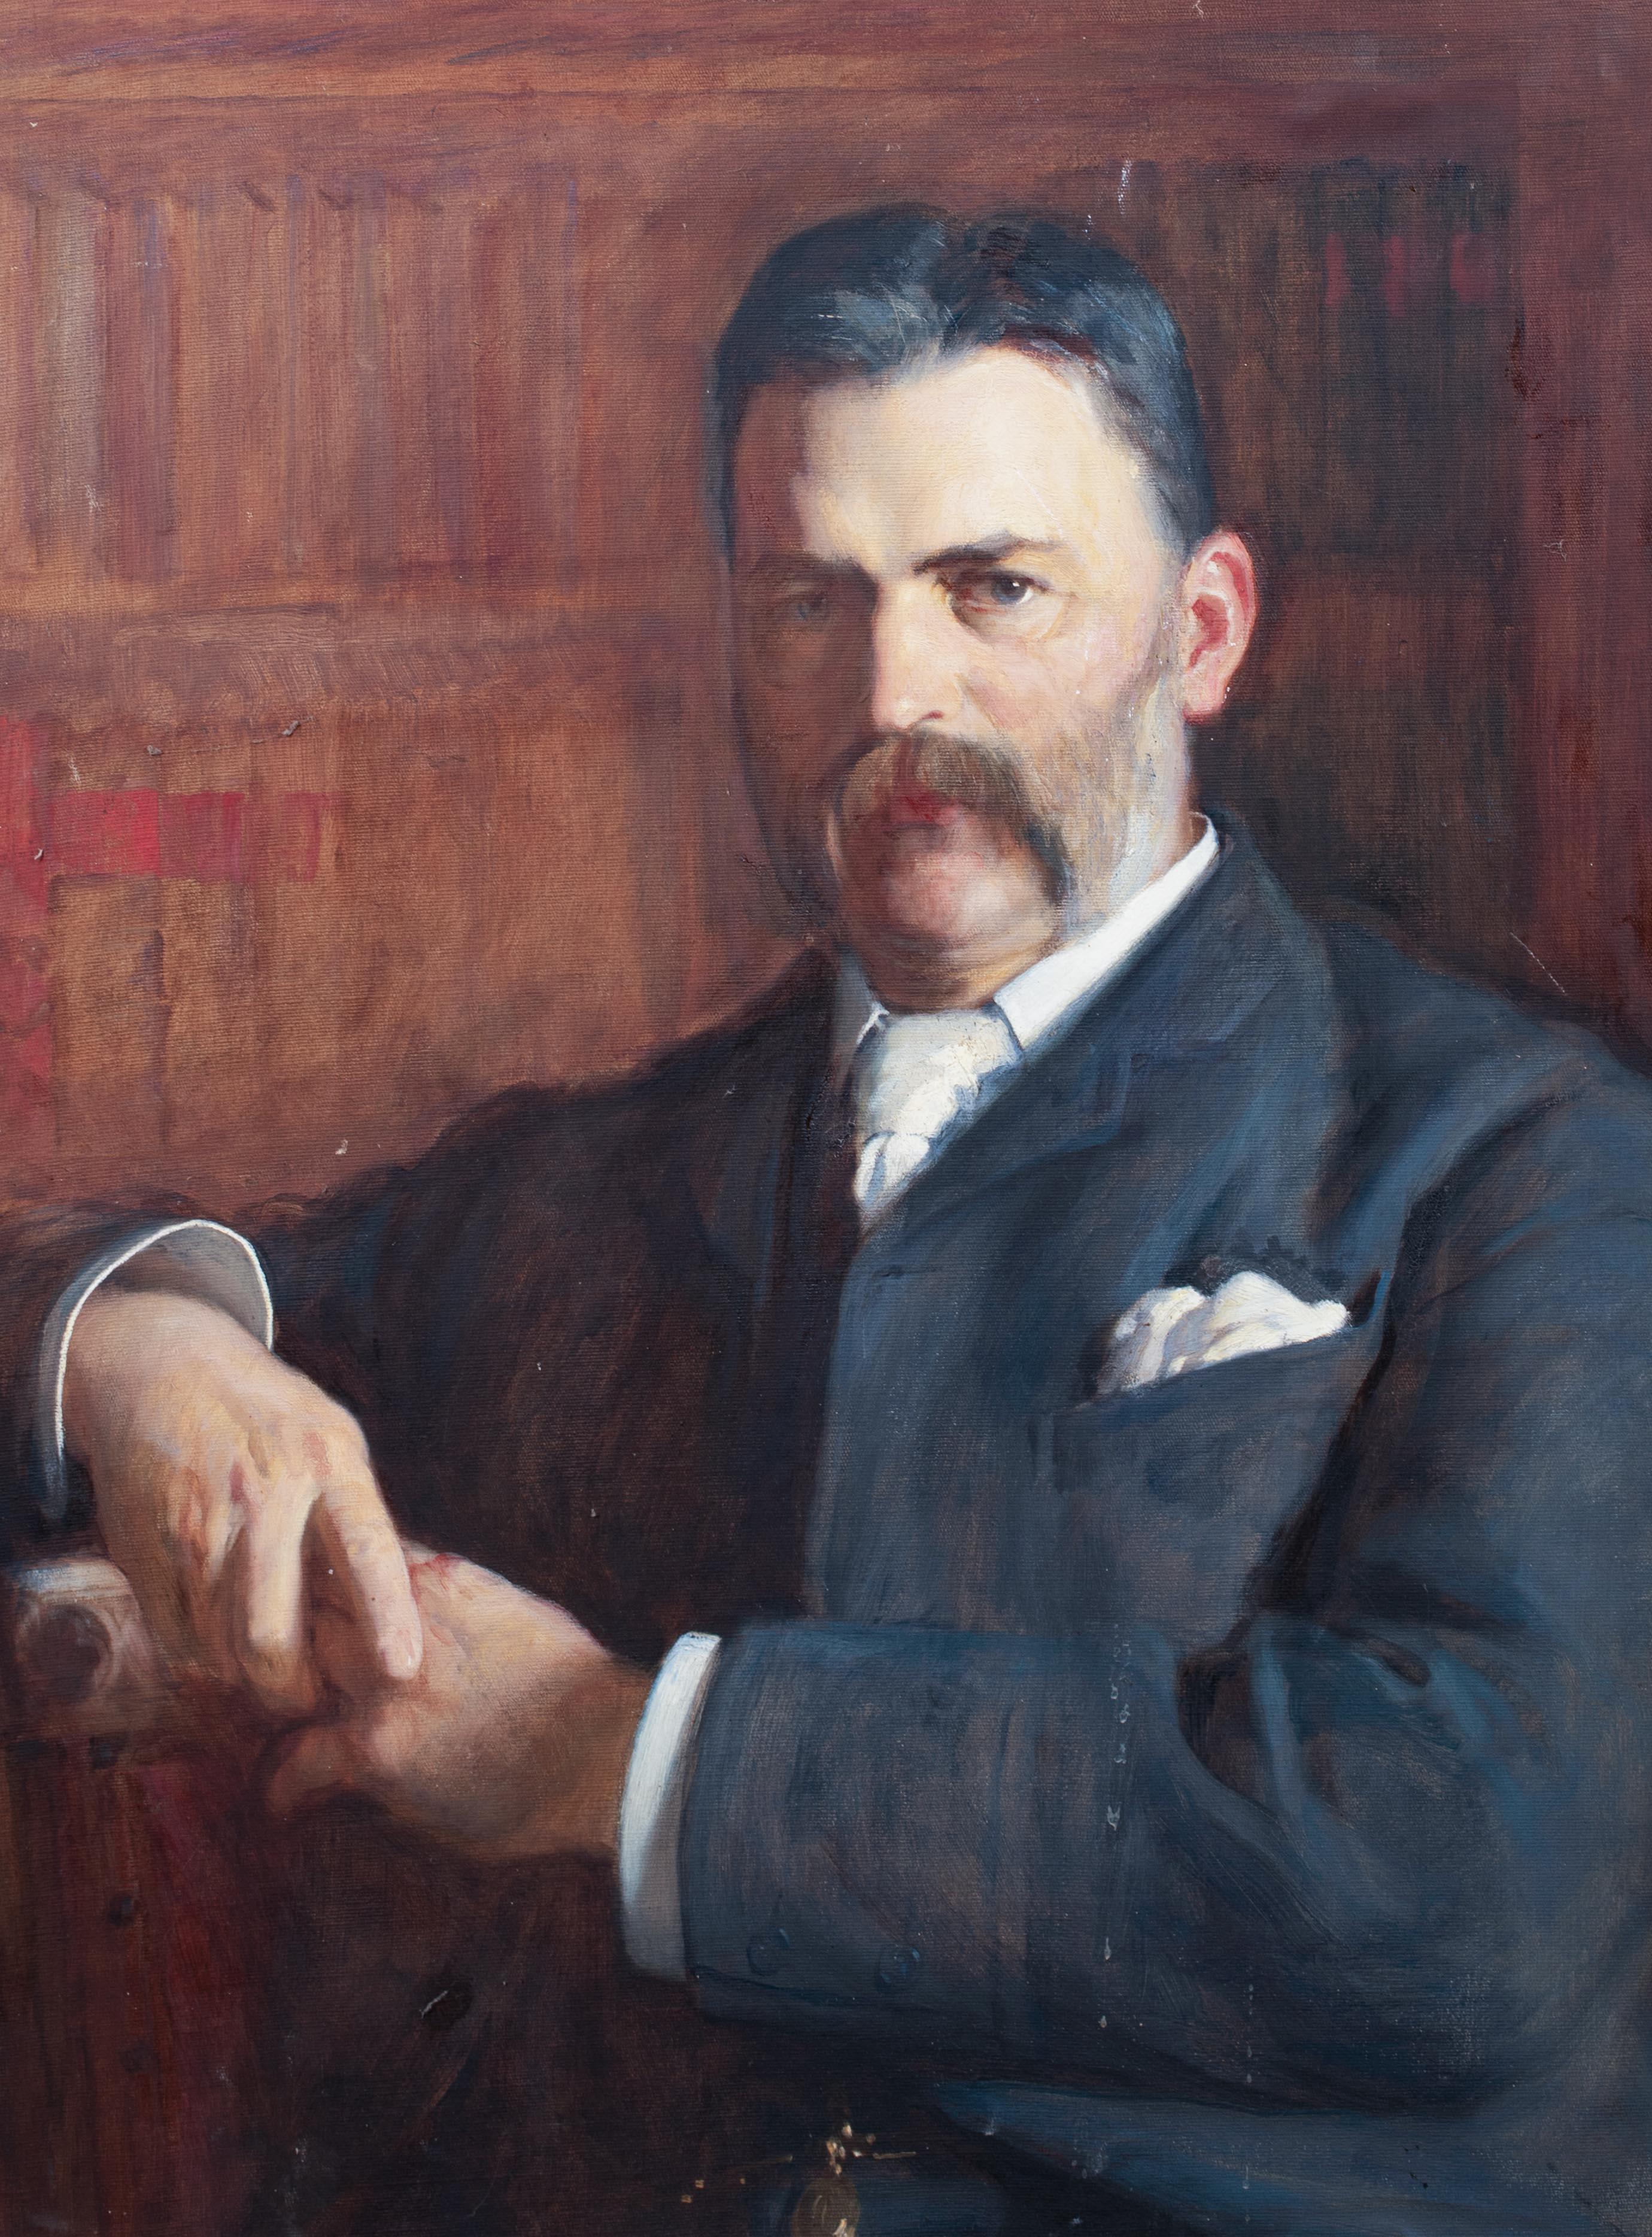 Portrait of Francis Muir (1839-1912), dated 1888

by FREDERICK SAMUEL BEAUMONT (1861-1922)

1888 Royal Academy Exhibited Work

Large 19th Century portrait of Francis Muir, oil on board by Frederick Samuel Beaumont. Excellent quality portrait by the